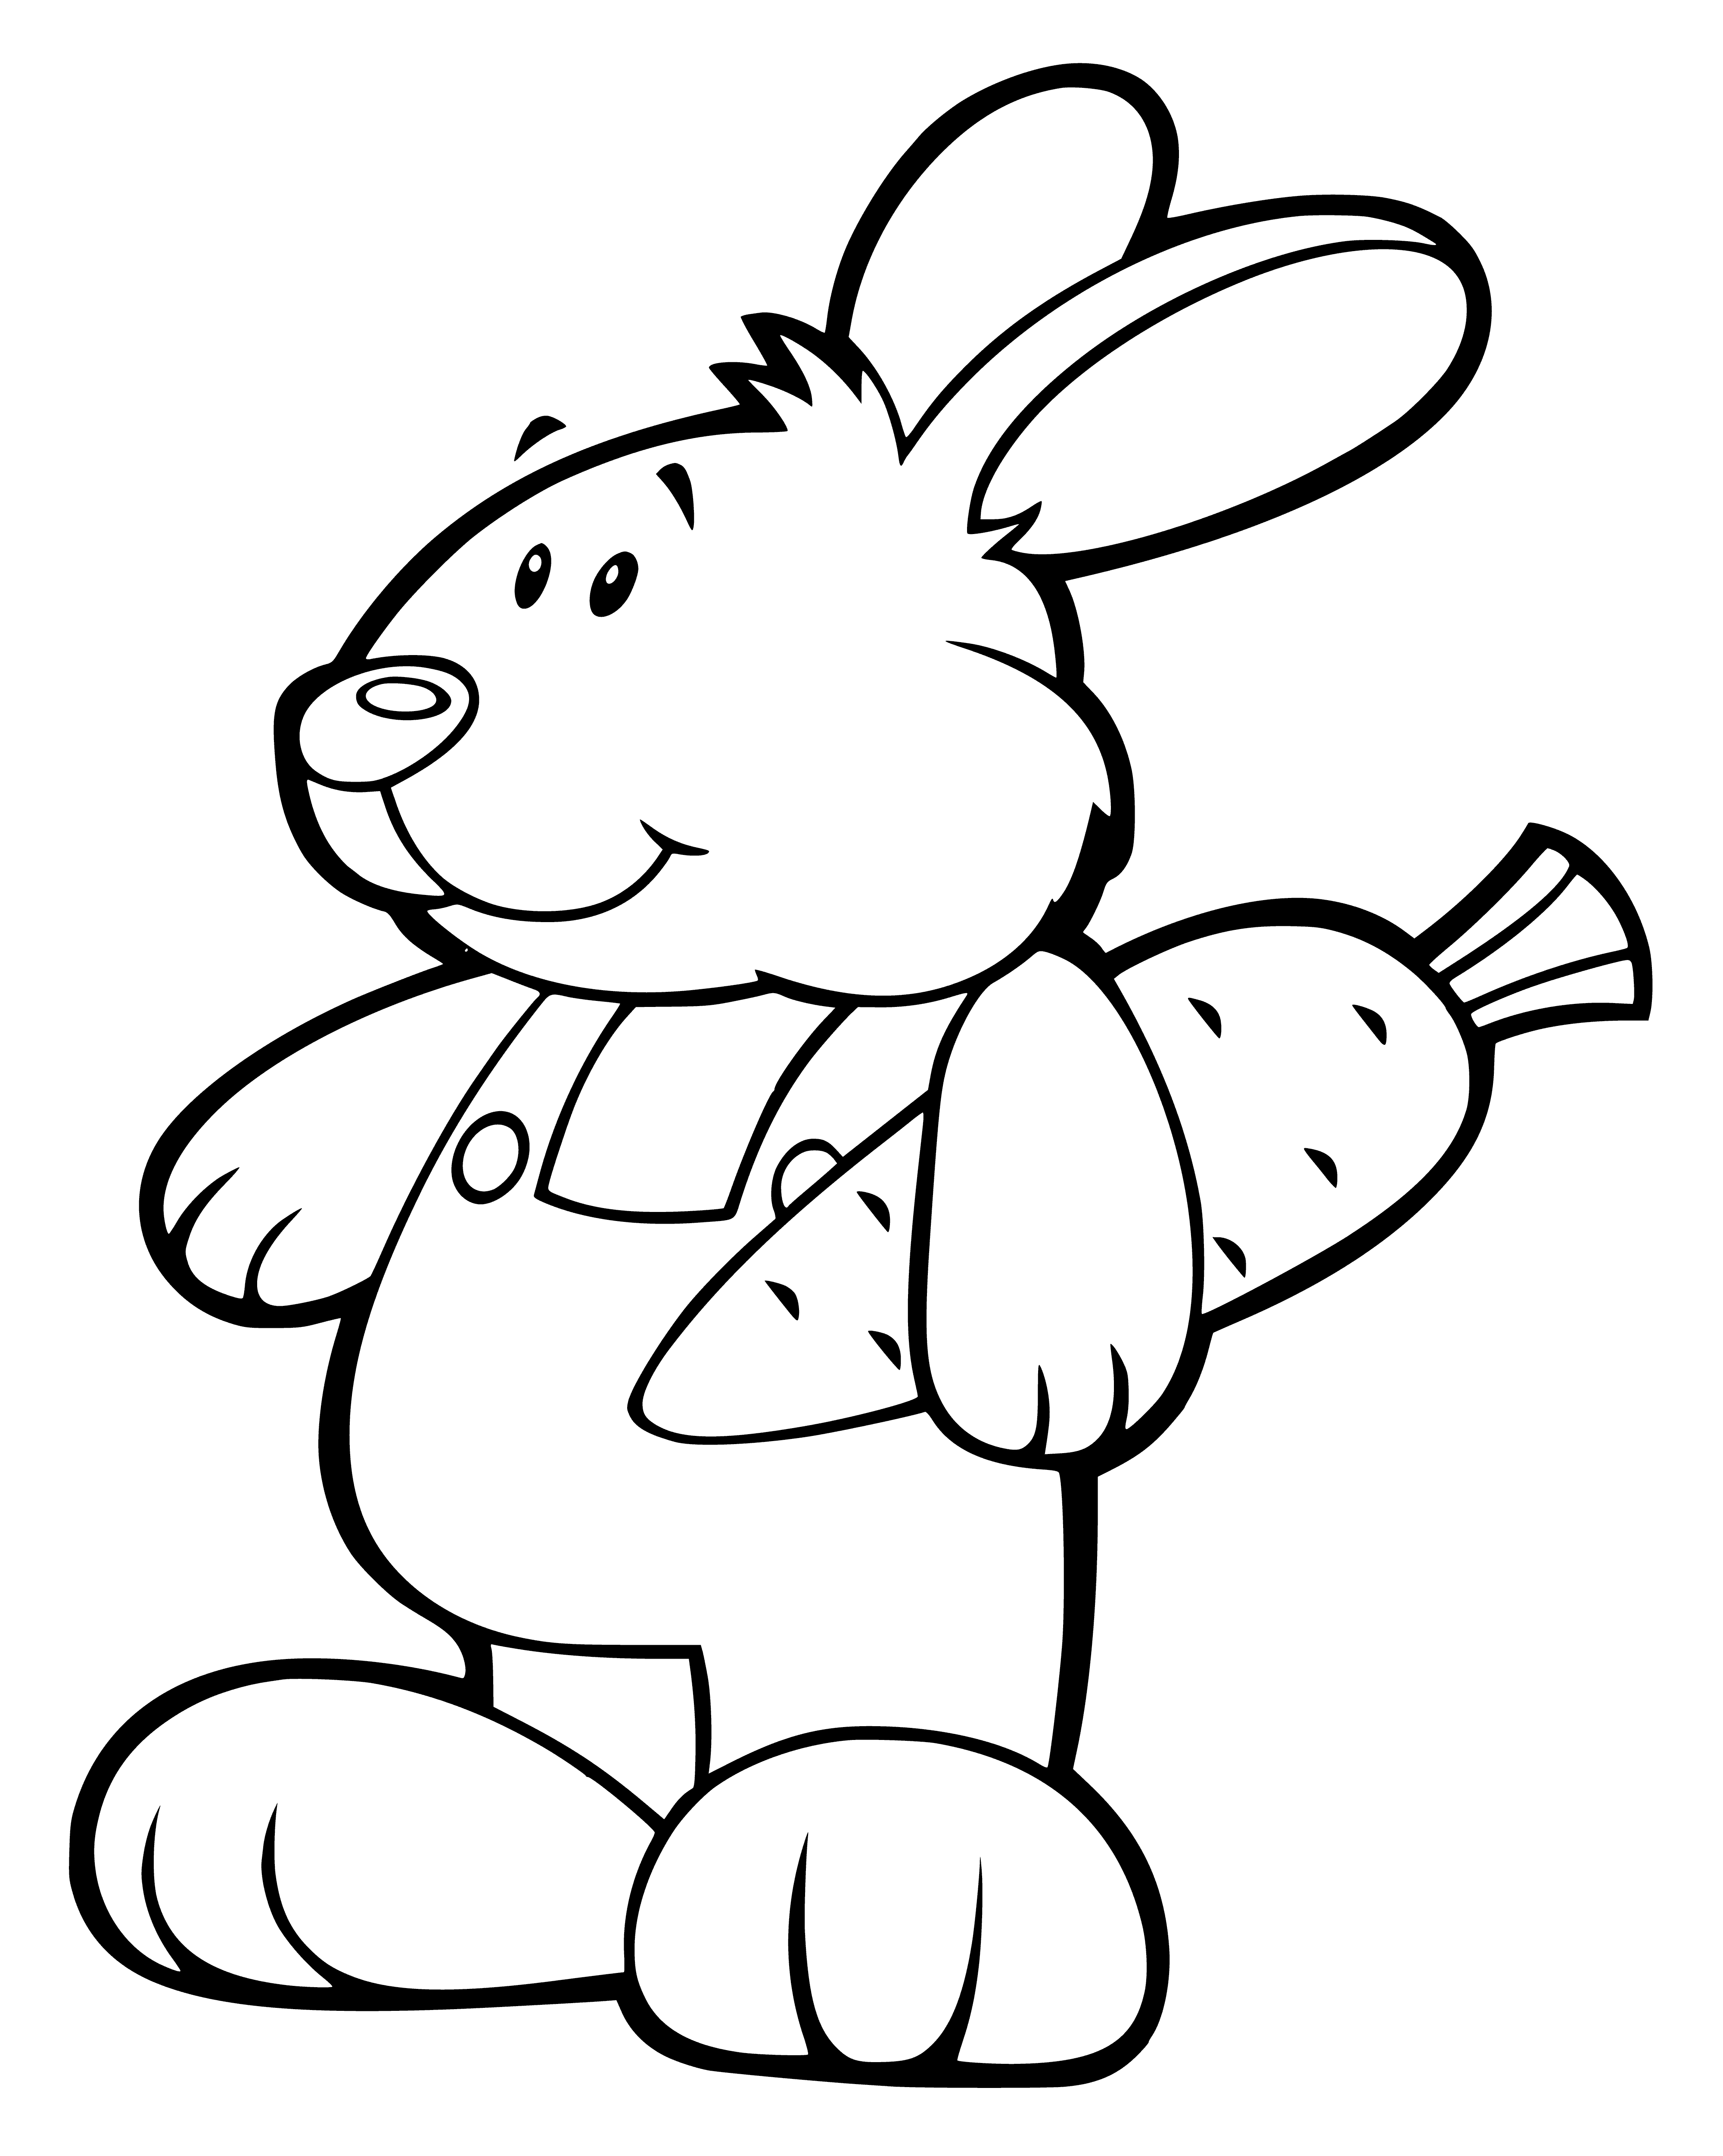 coloring page: A small brown rabbit looks up, paws raised, at an orange carrot hanging in the air.